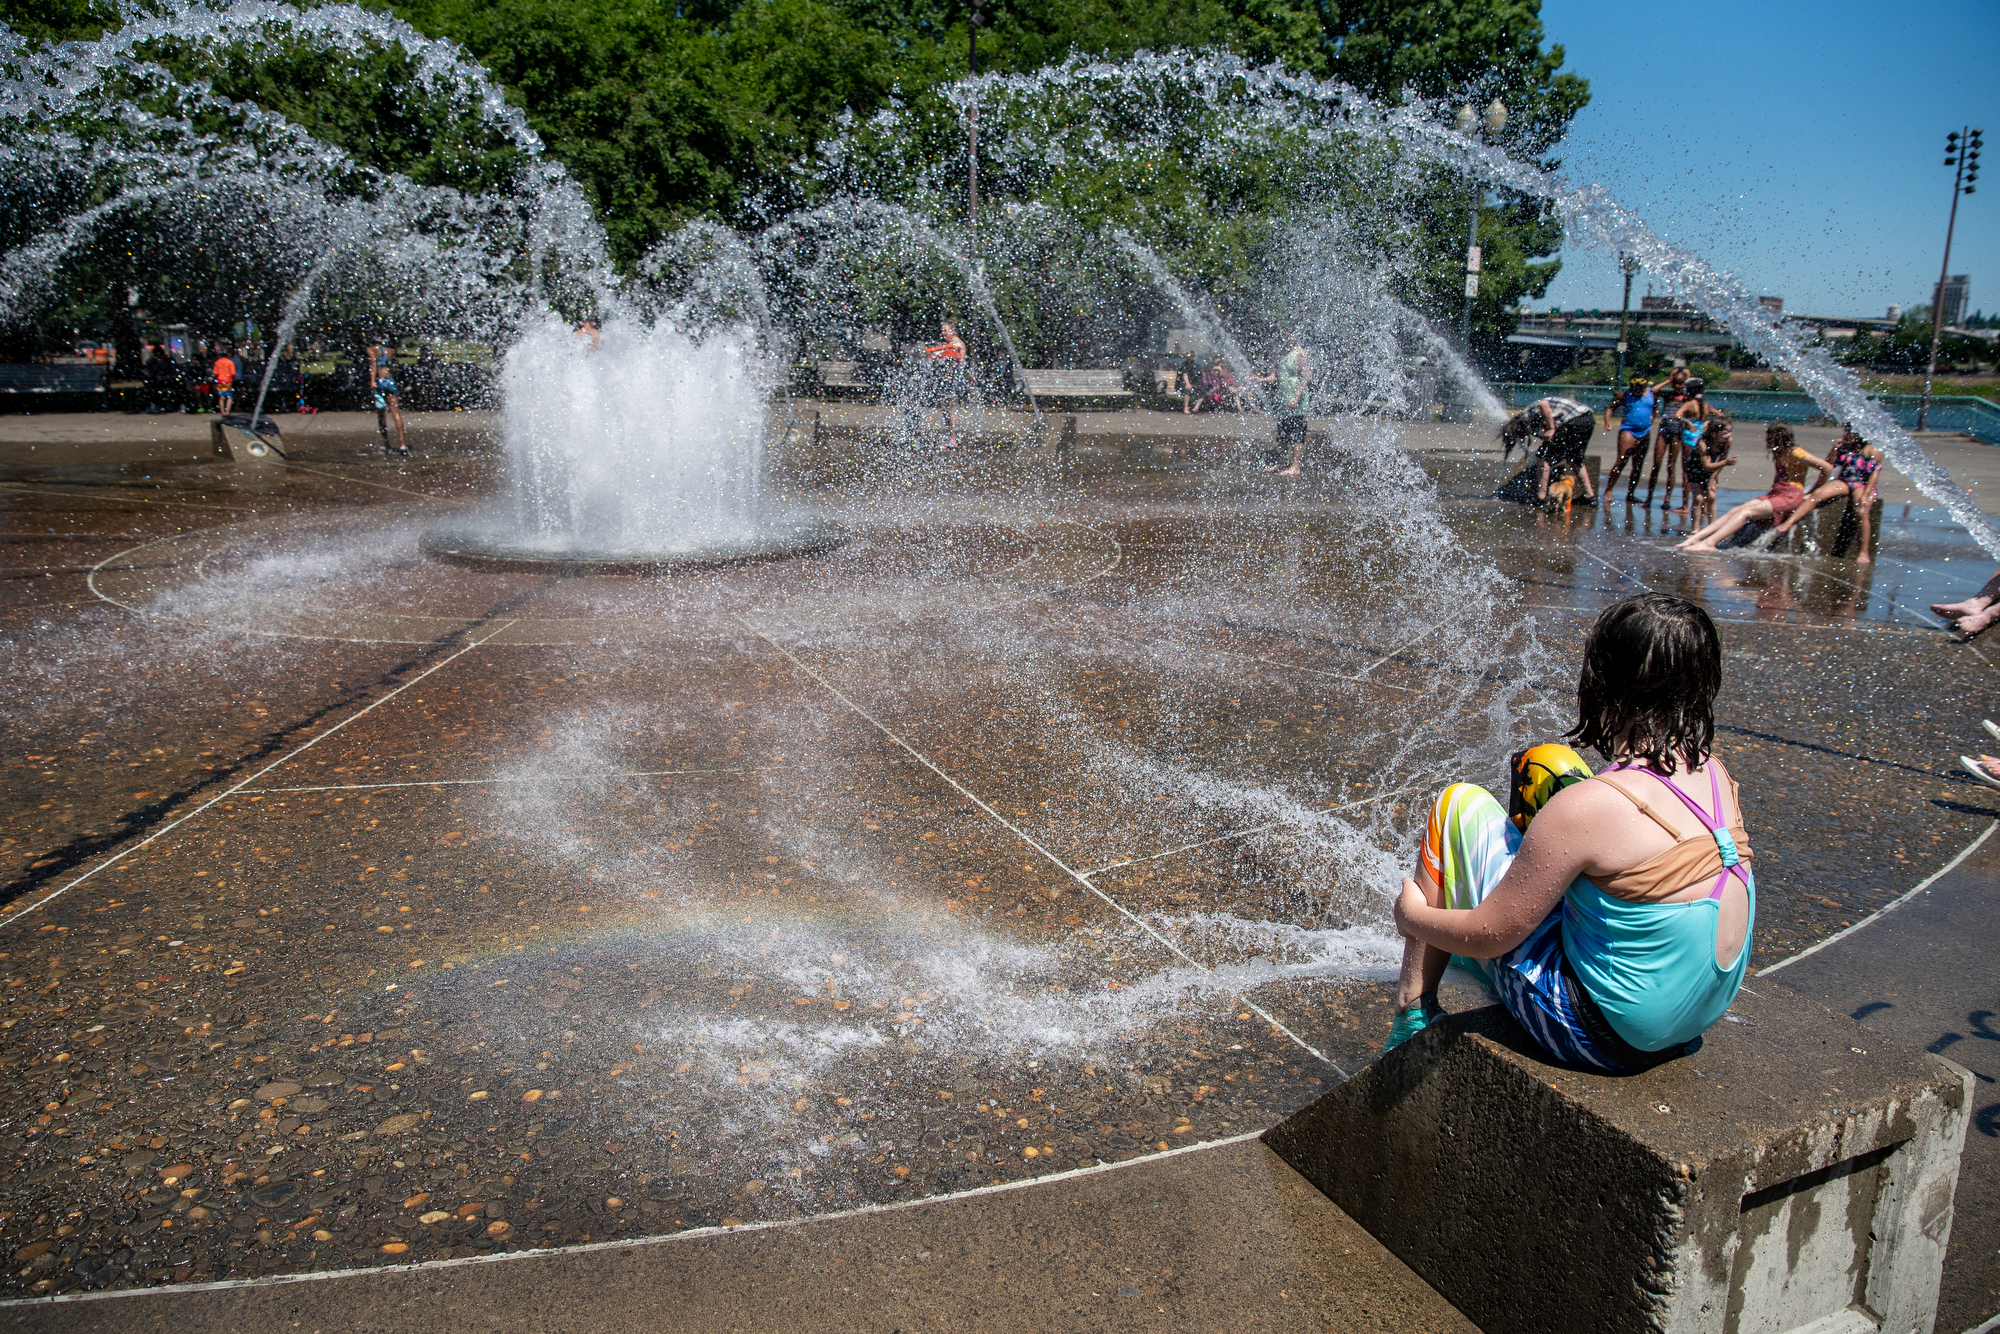 As heat wave cooks Oregon, these swimming pools, splash pads and